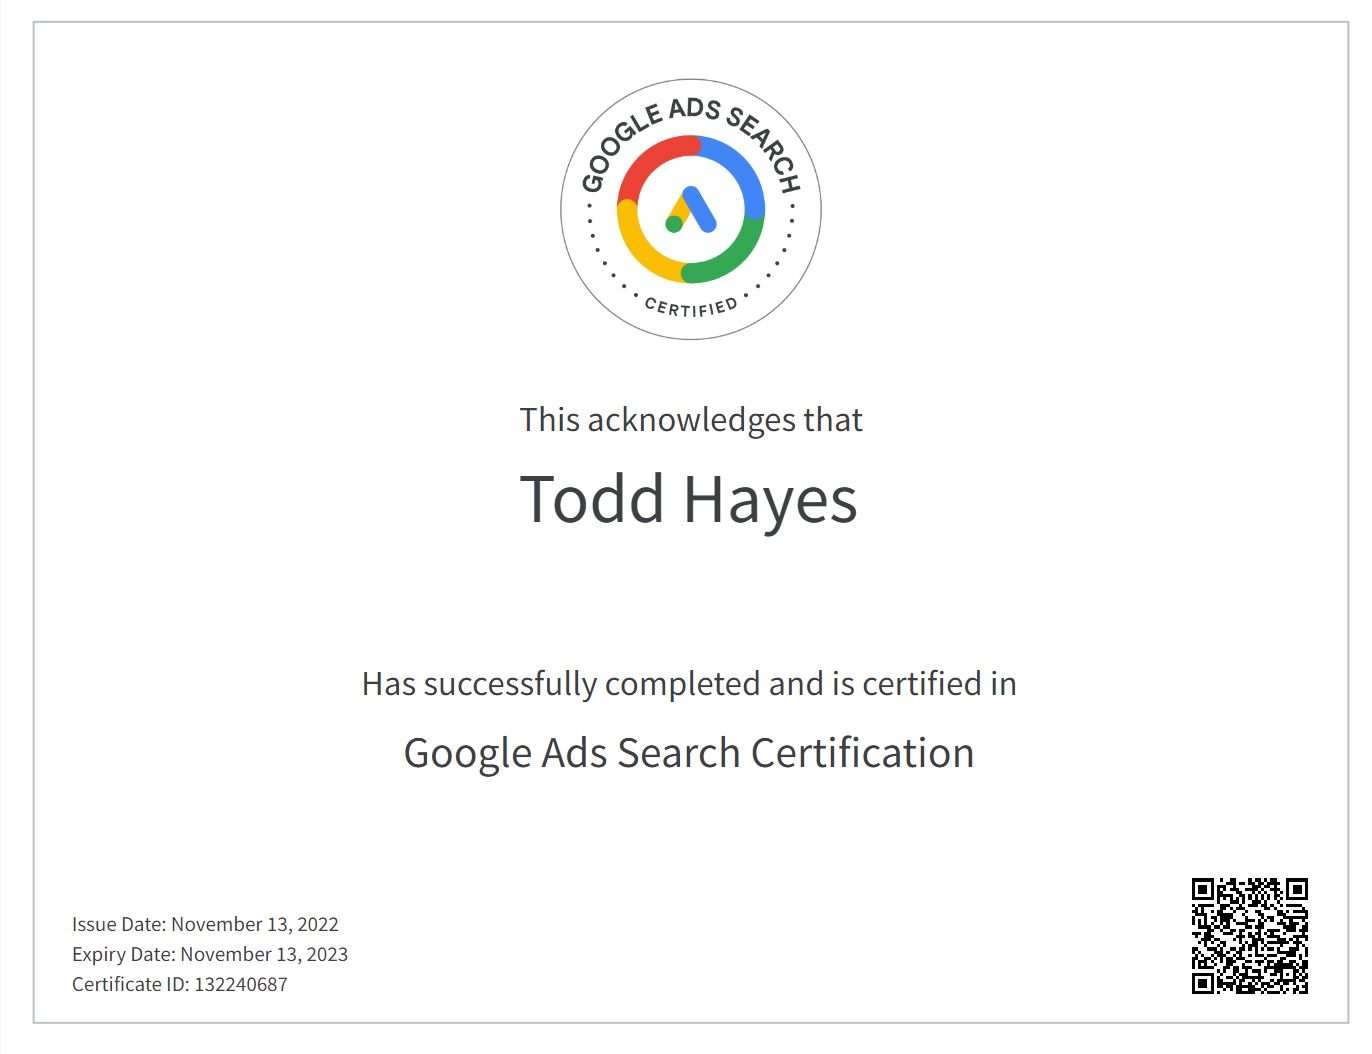 a google ads search certificate for todd hayes